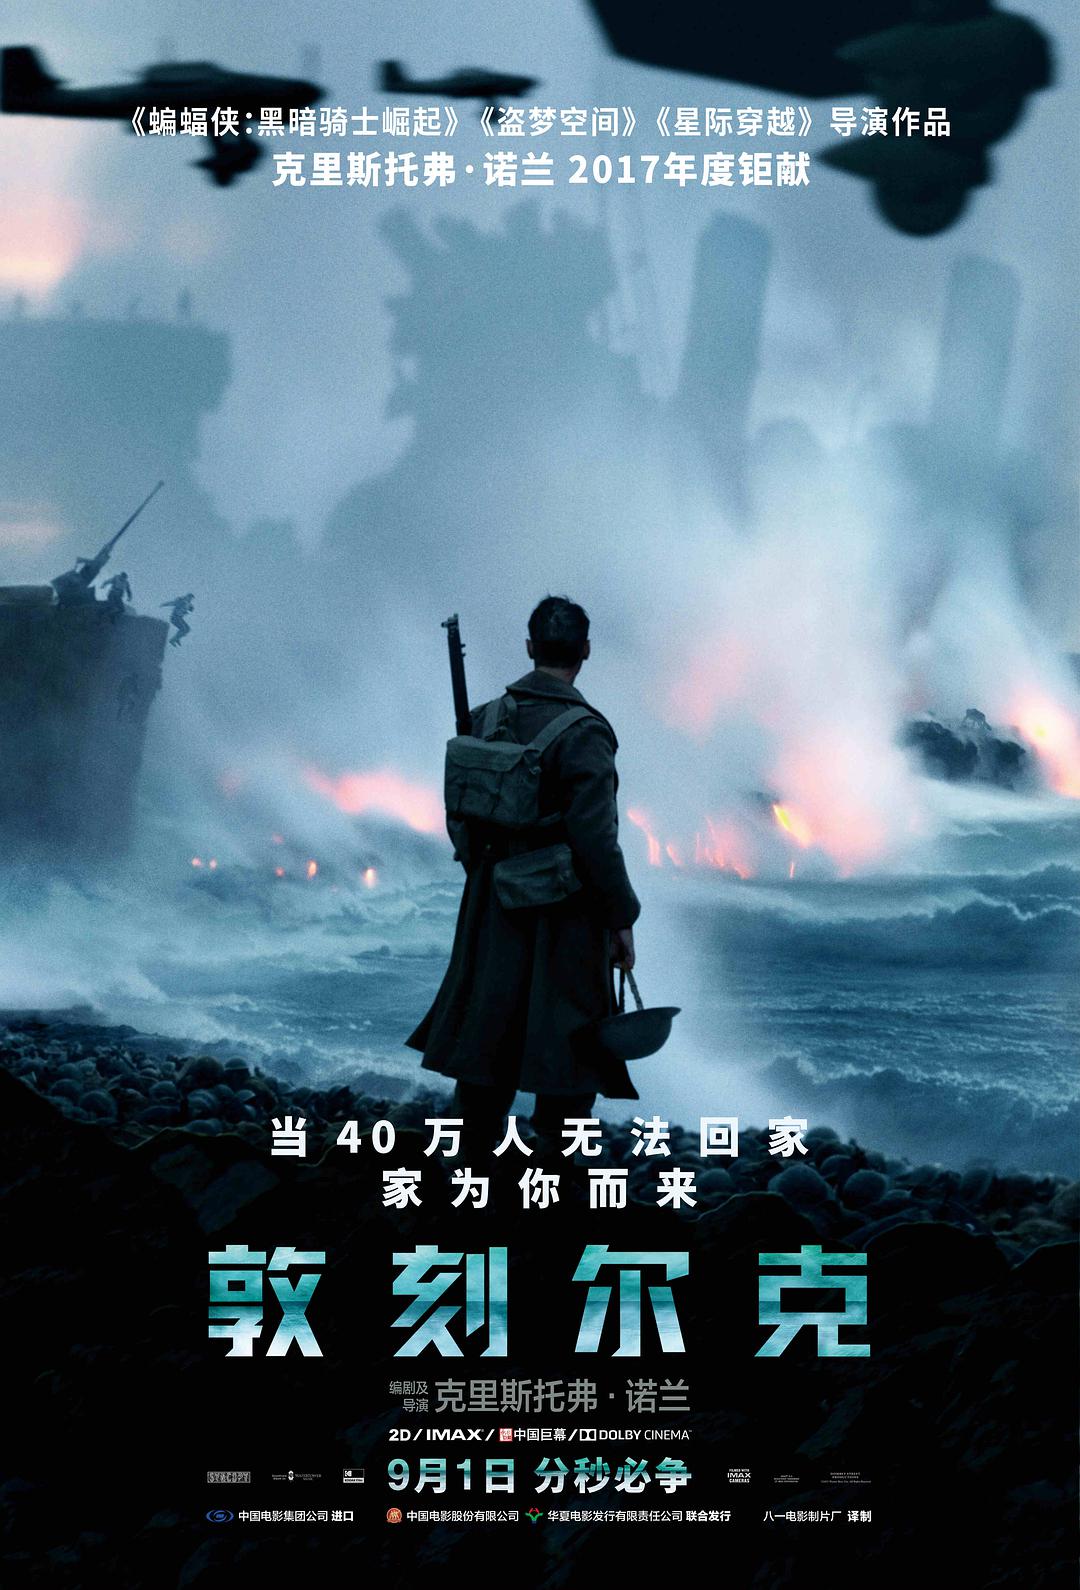 ؿ̶/ؿ˶˴ж Dunkirk.2017.1080p.BluRay.x264.DTS-HD.MA.5.1-FGT 9.41GB-1.png